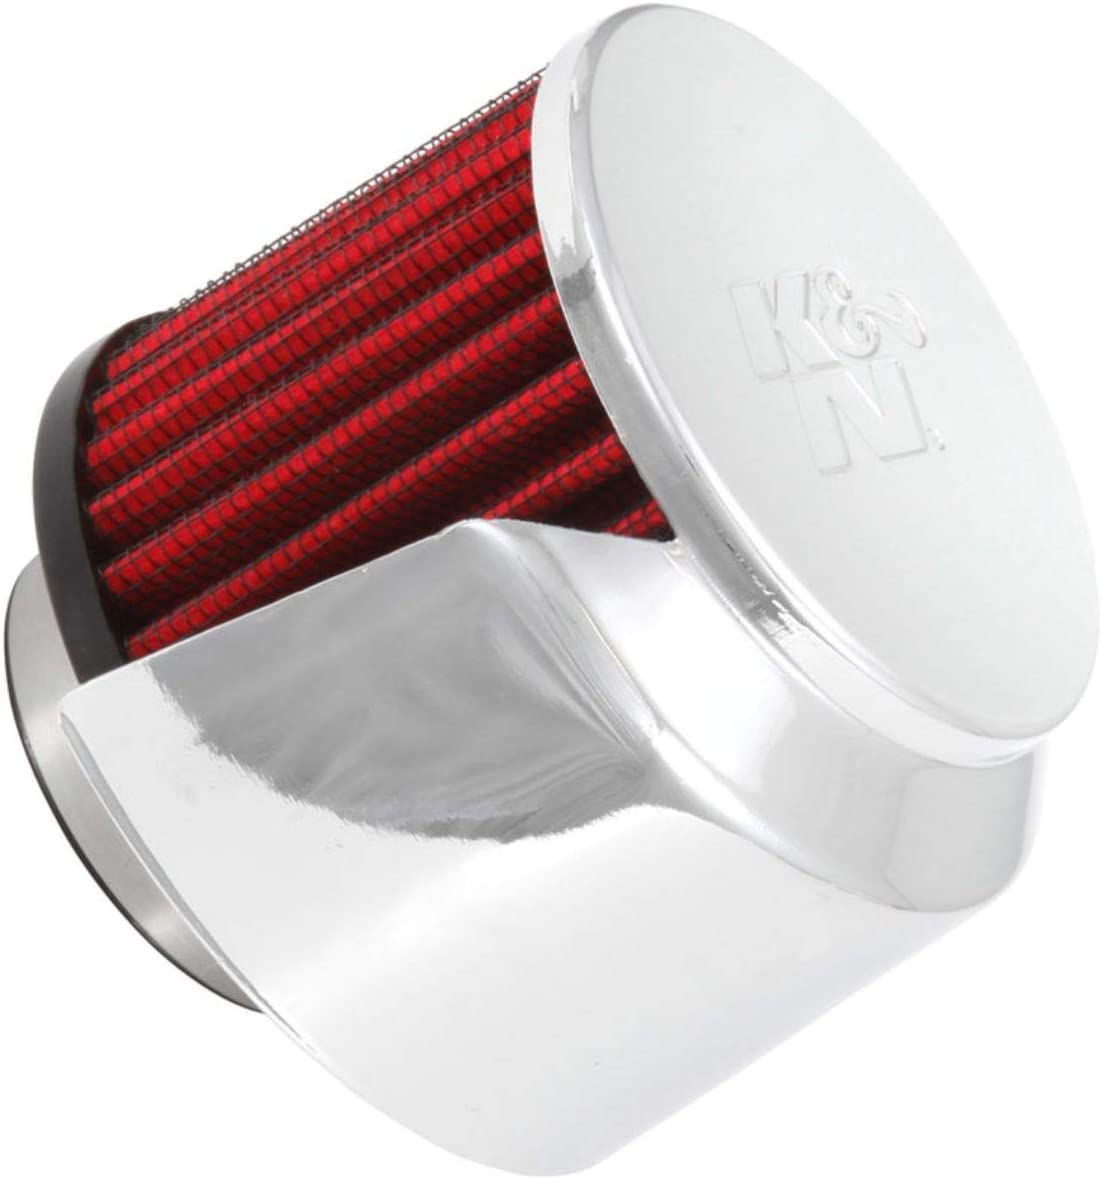 K&N Vent Air Filter/ Breather: High Performance, Premium, Washable, Replacement Engine Filter: Flange Diameter: 1.5 In, Filter Height: 2.5 In, Flange Length: 0.625 In, Shape: Breather, 62-1514